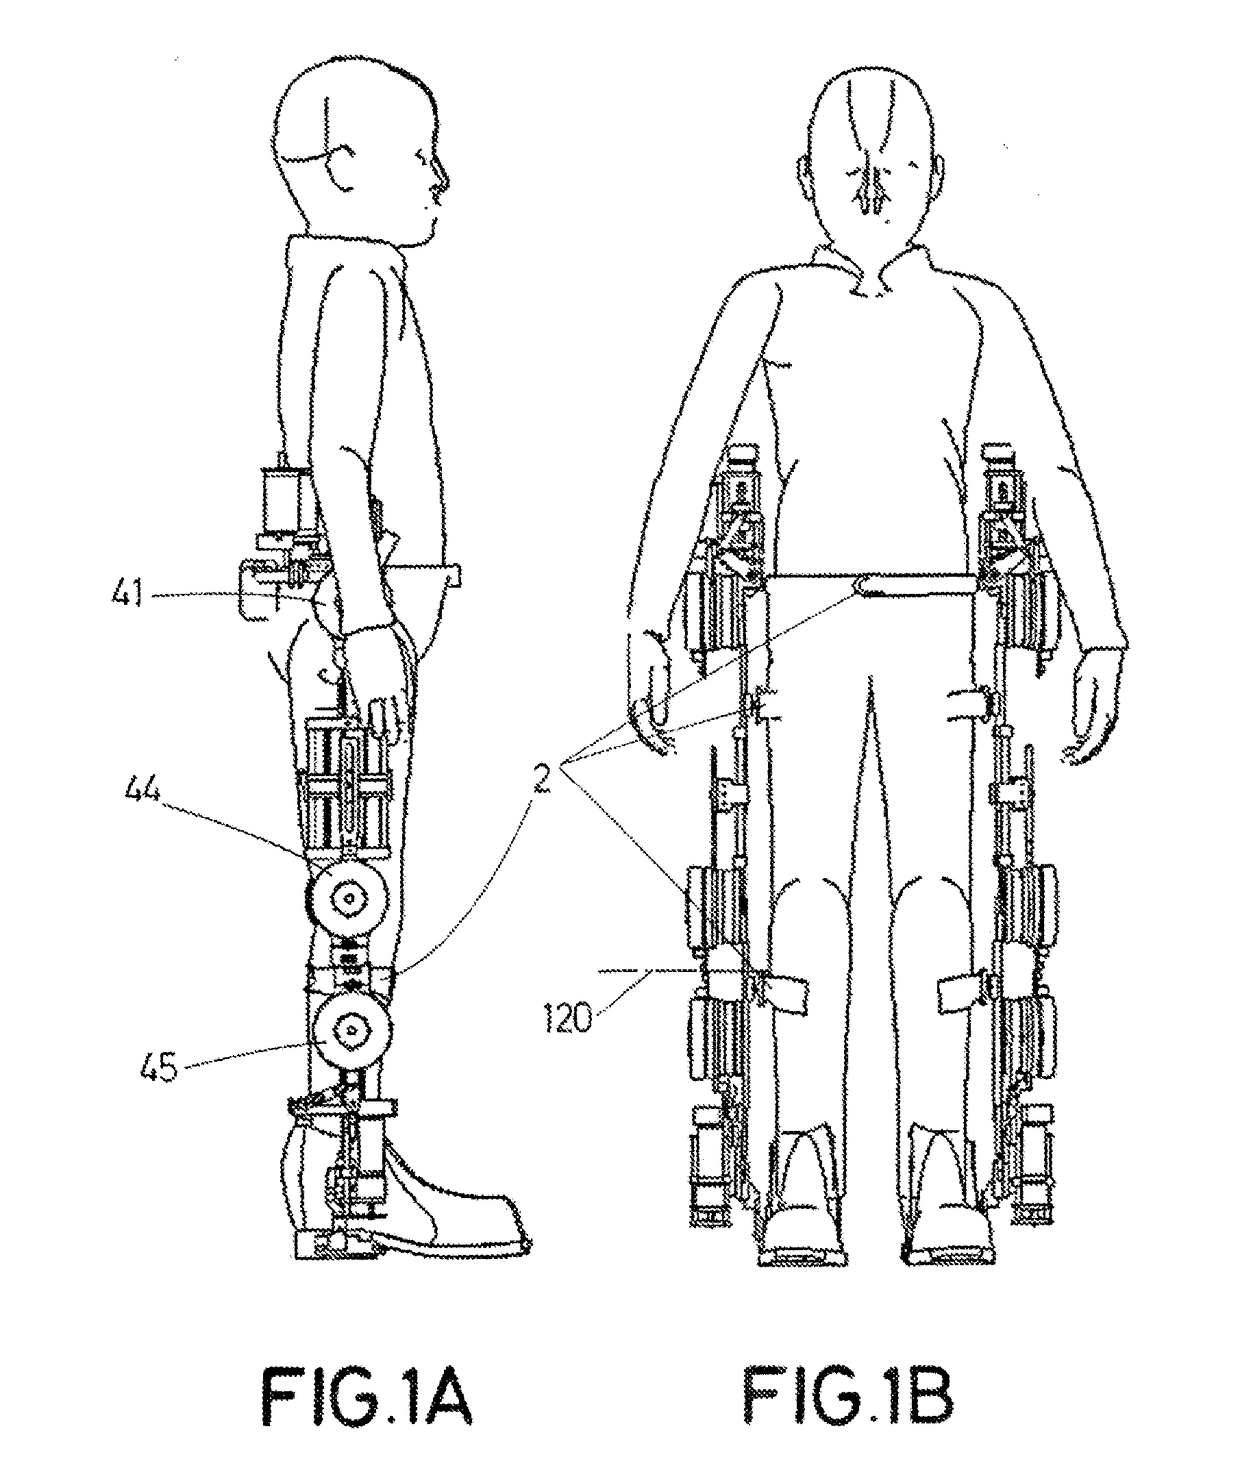 Exoskeleton for assisting human movement